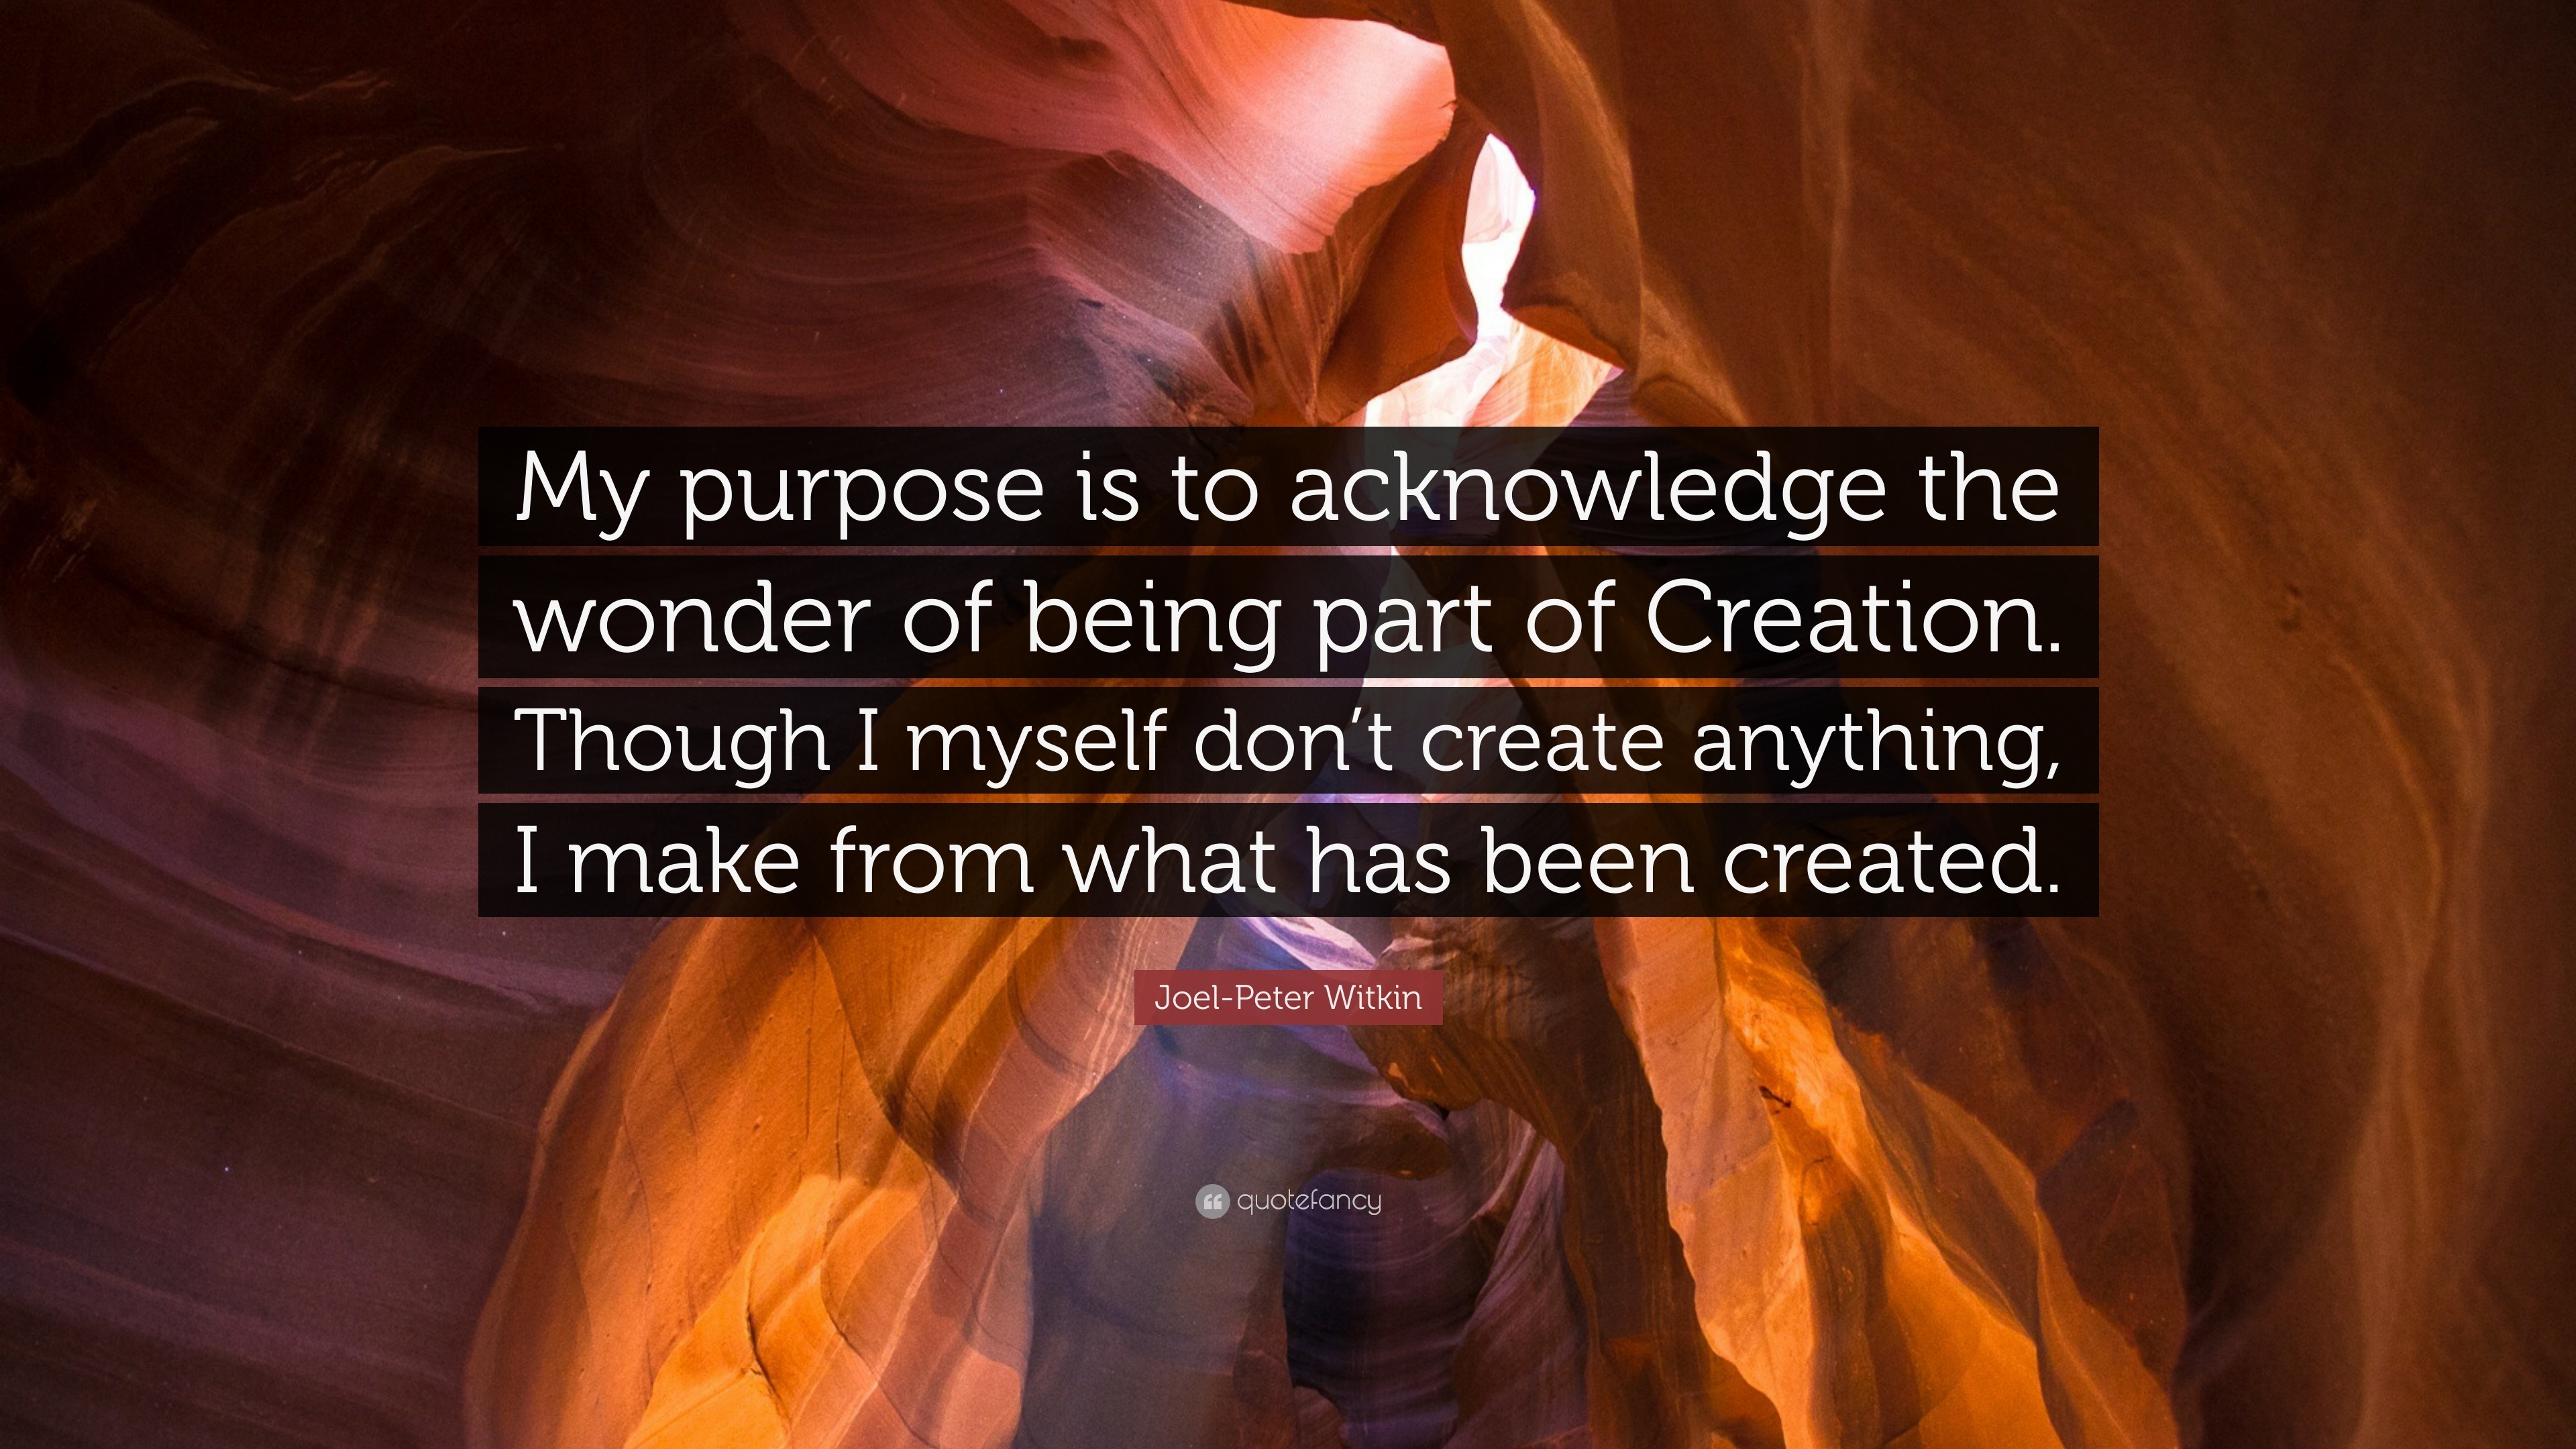 JoelPeter Witkin Quote “My purpose is to acknowledge the